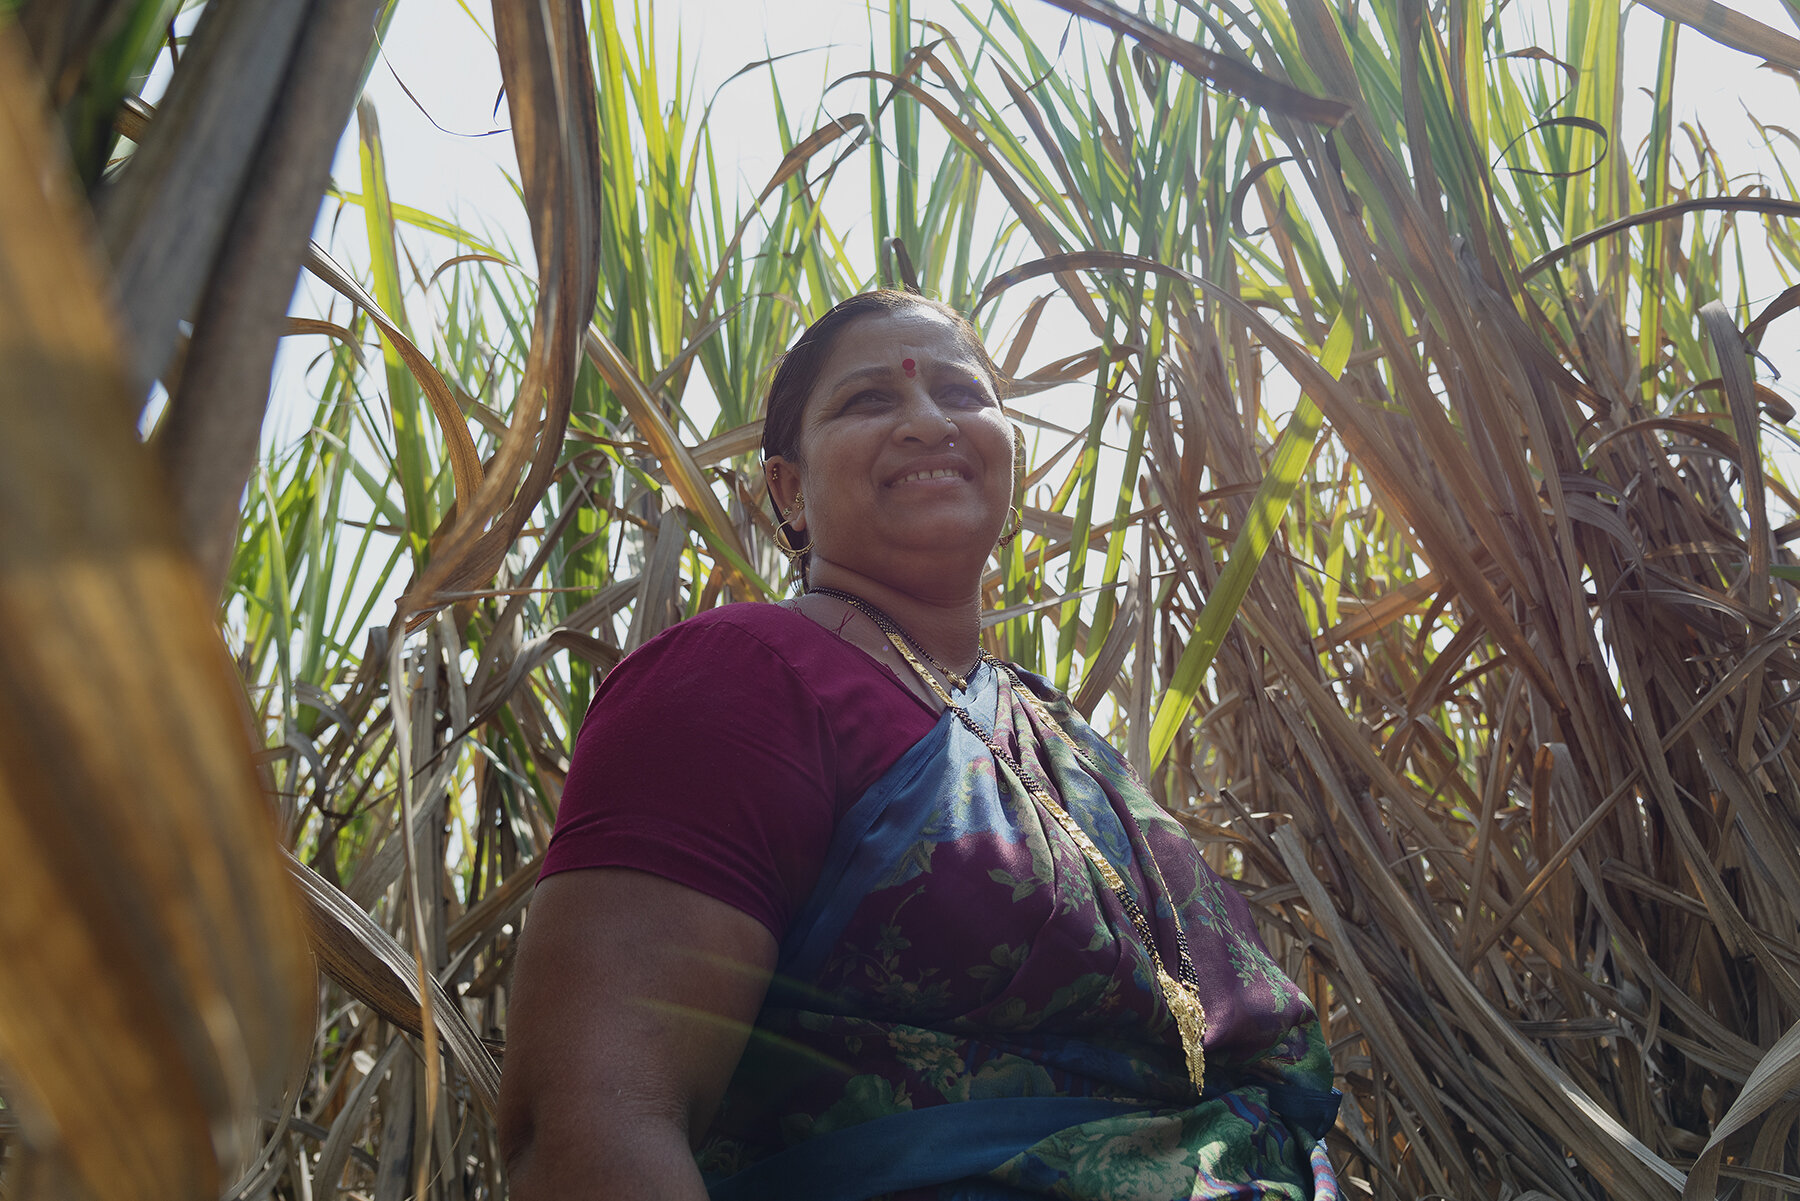   Sanjana Salunke , from Nagthane in Satara, stands in her sugarcane field. A few years ago she was working as a day laborer to help make ends meet after her husband’s car business lost a lot of money. When she heard that Mann Deshi offered women loa